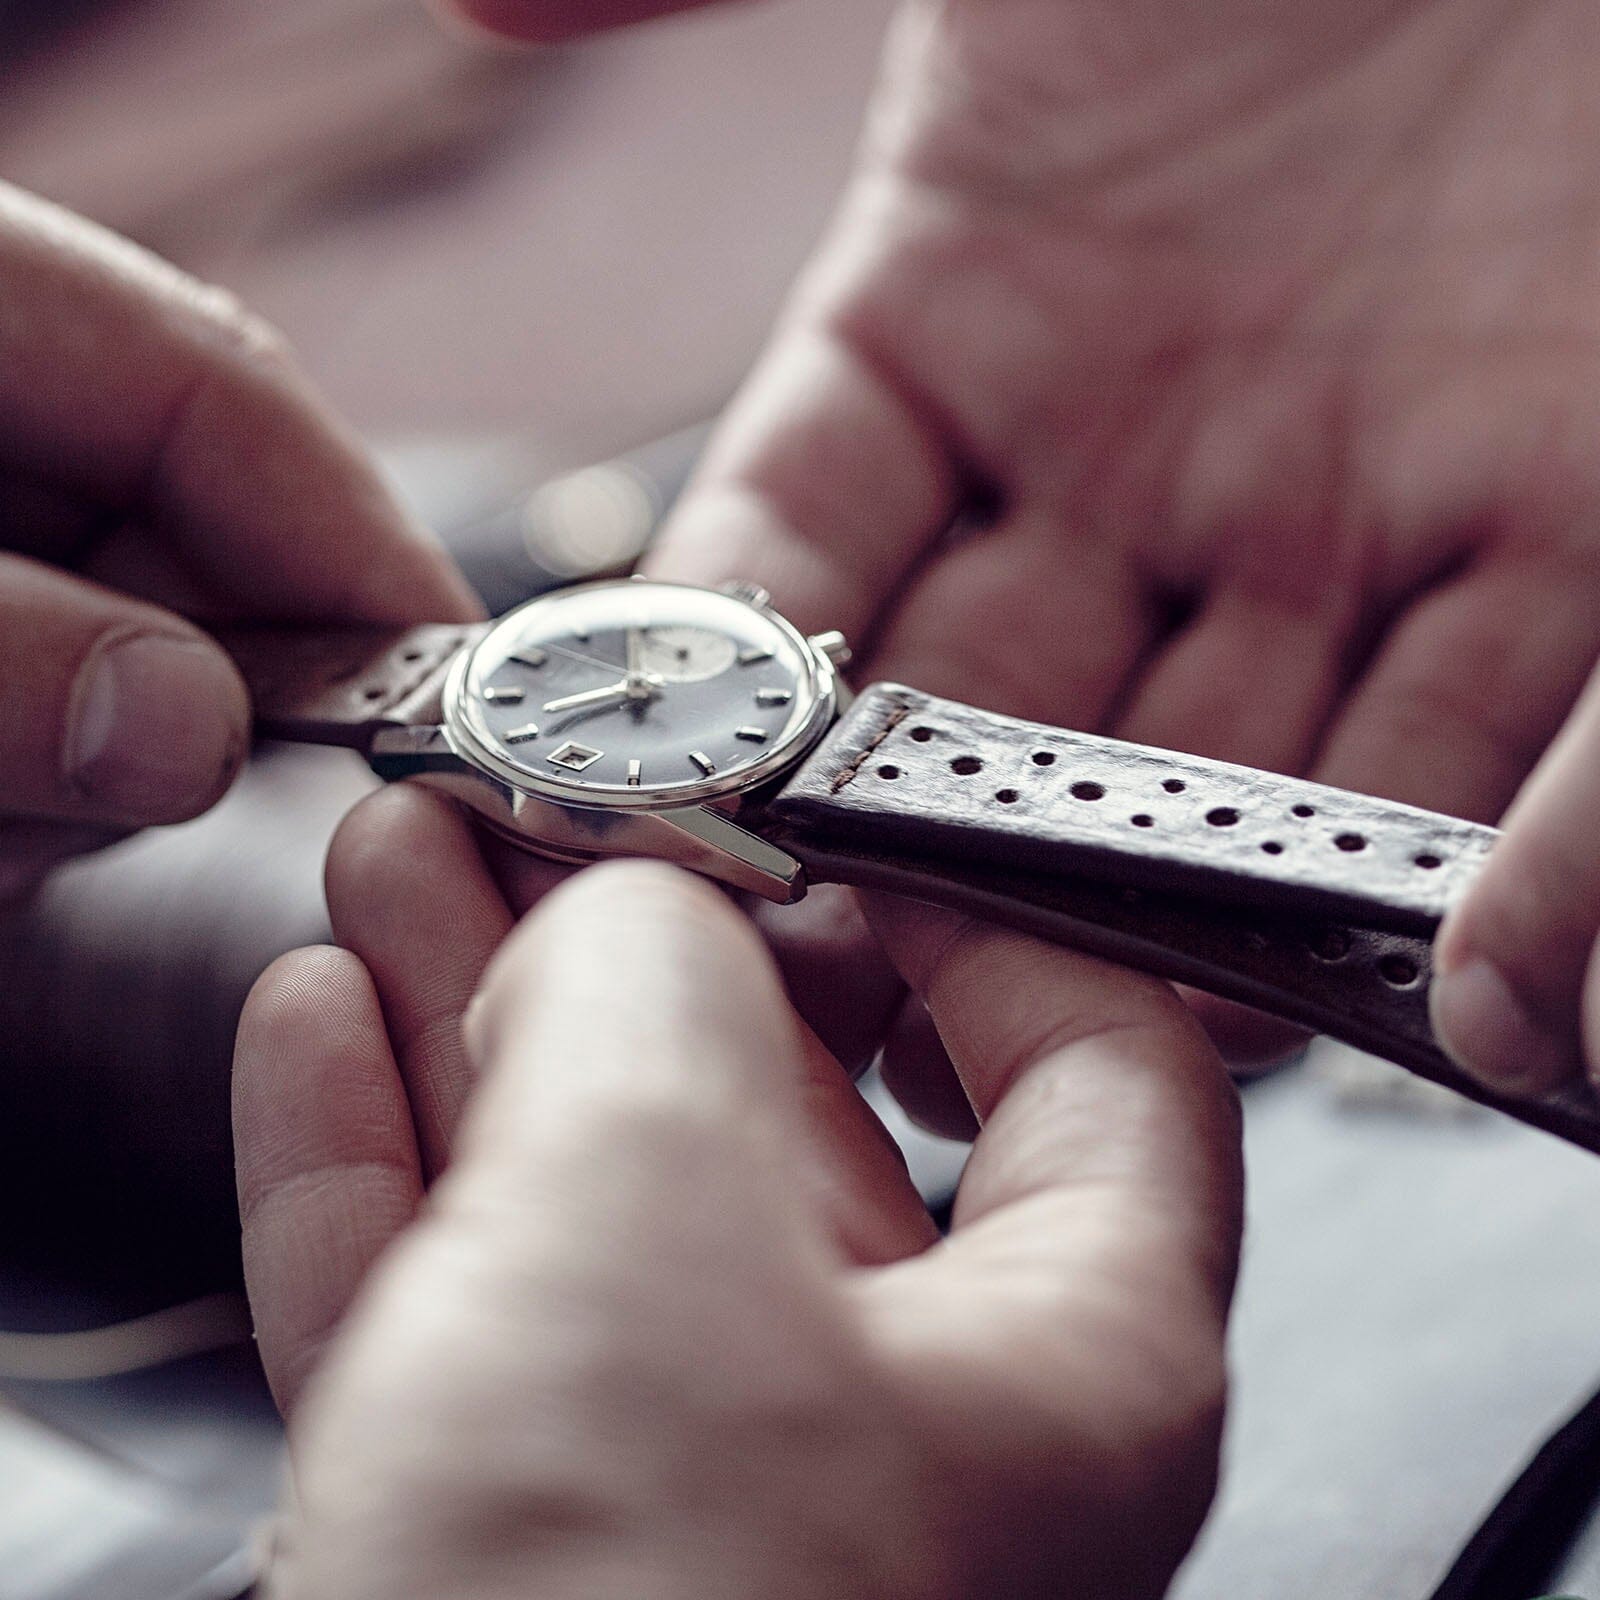 WATCH STRAPS MADE BY PASSION: JEAN PAUL MENICUCCI AND BULANG AND SONS